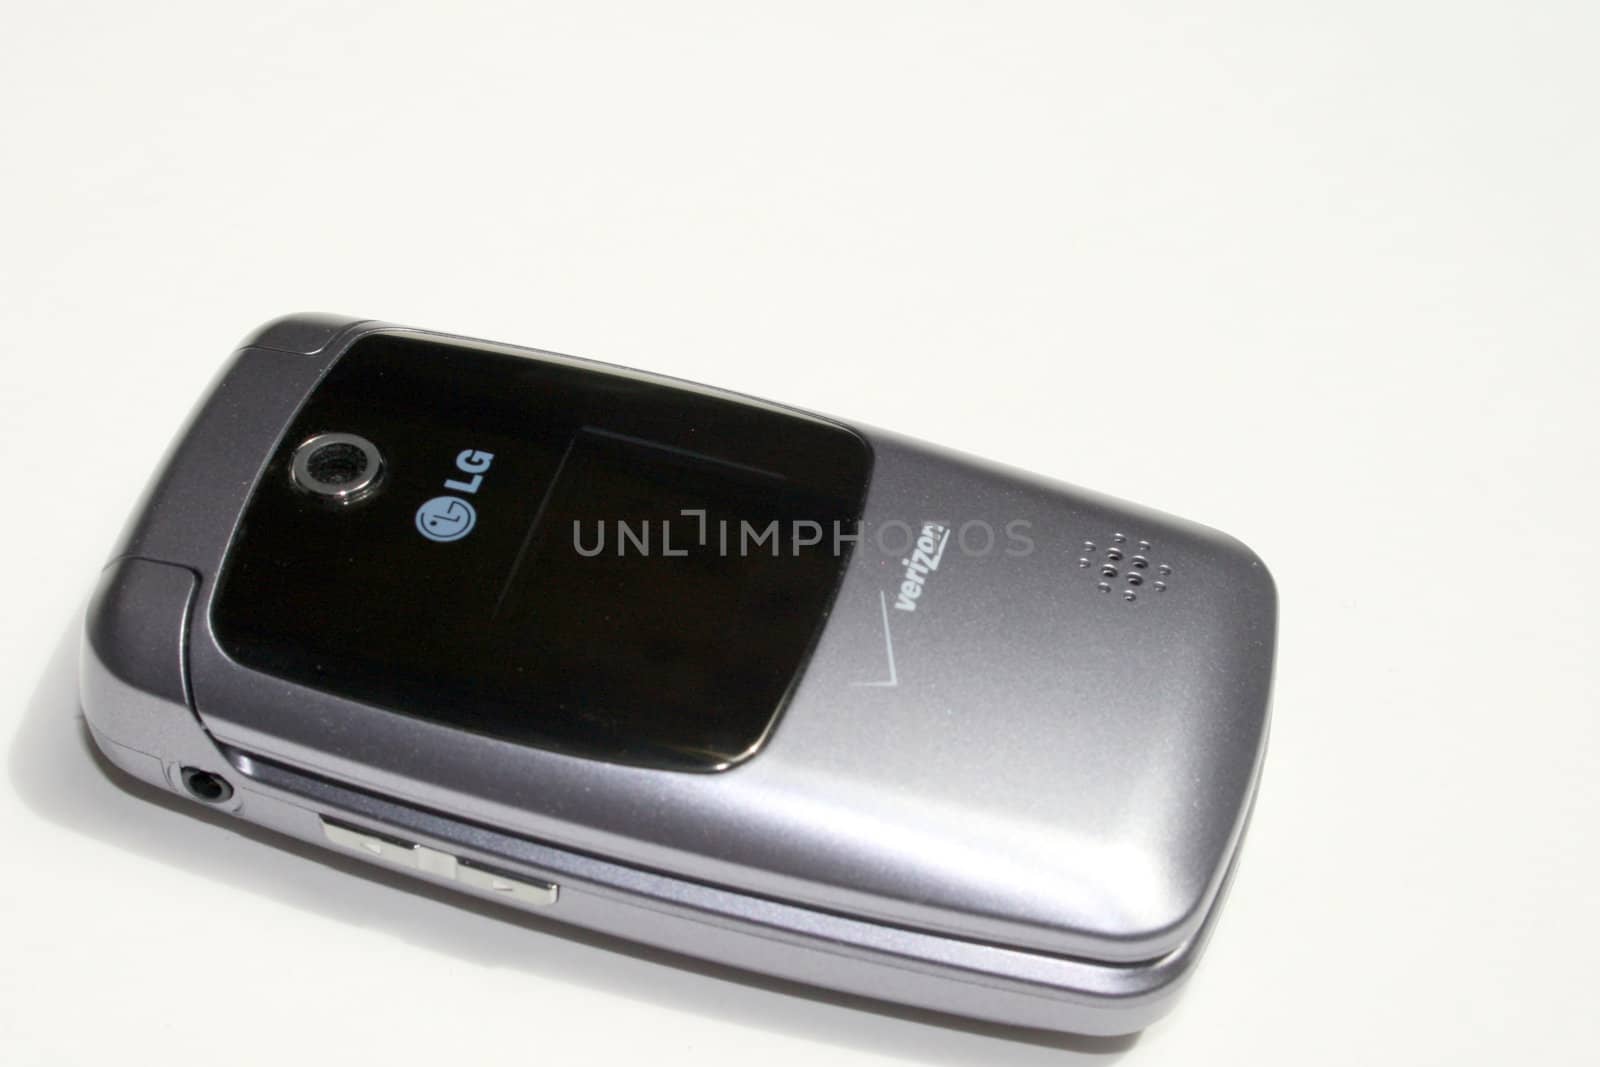 a new LG brand cell phone, in a silver case